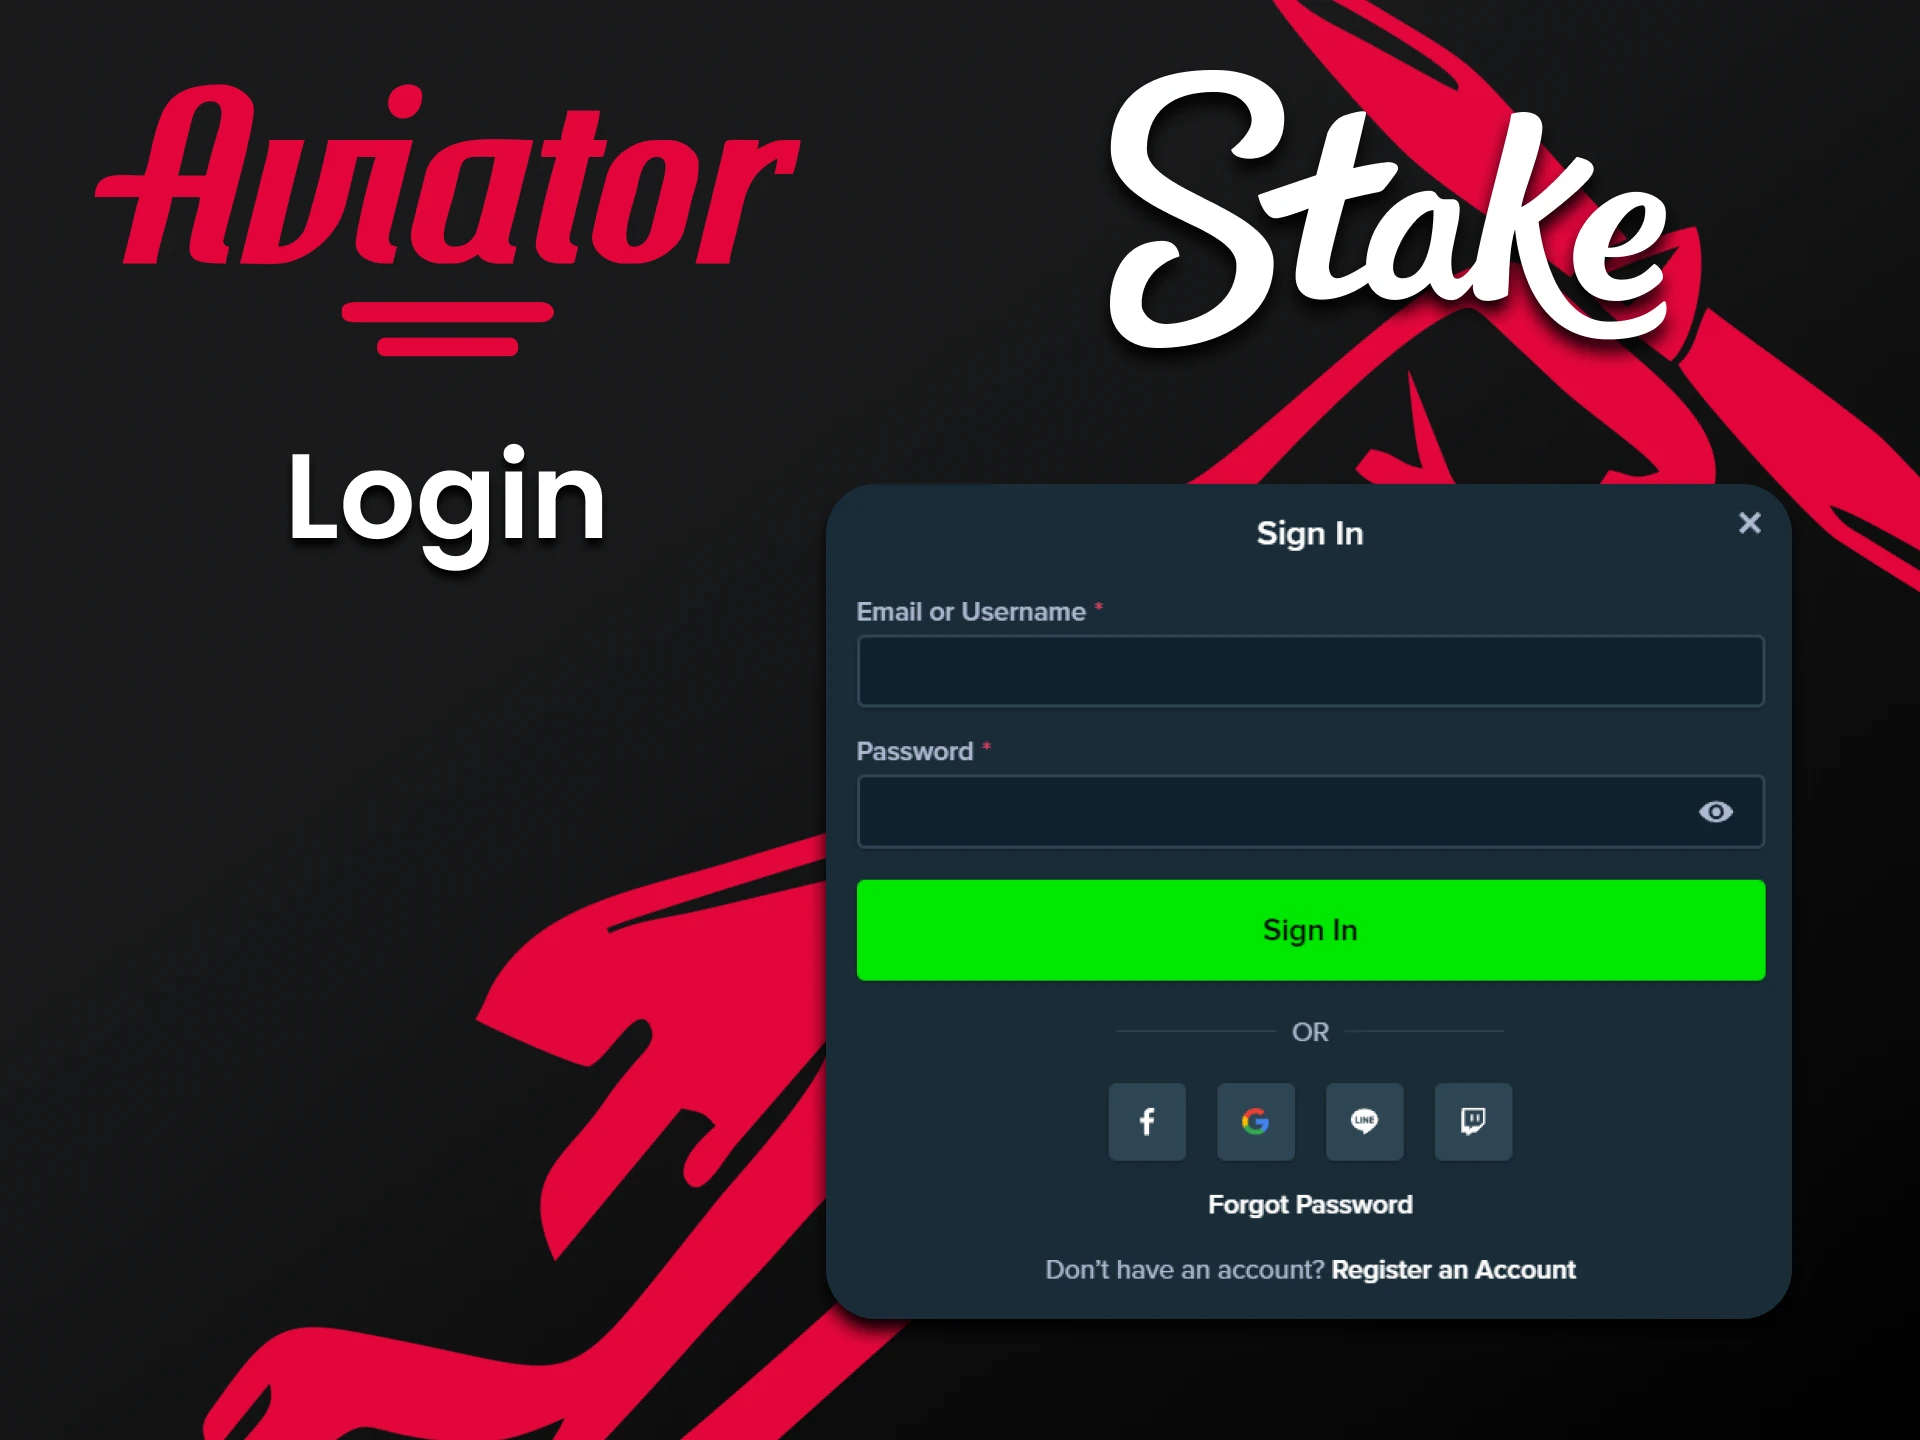 By logging into your personal Stake account you can play Aviator.